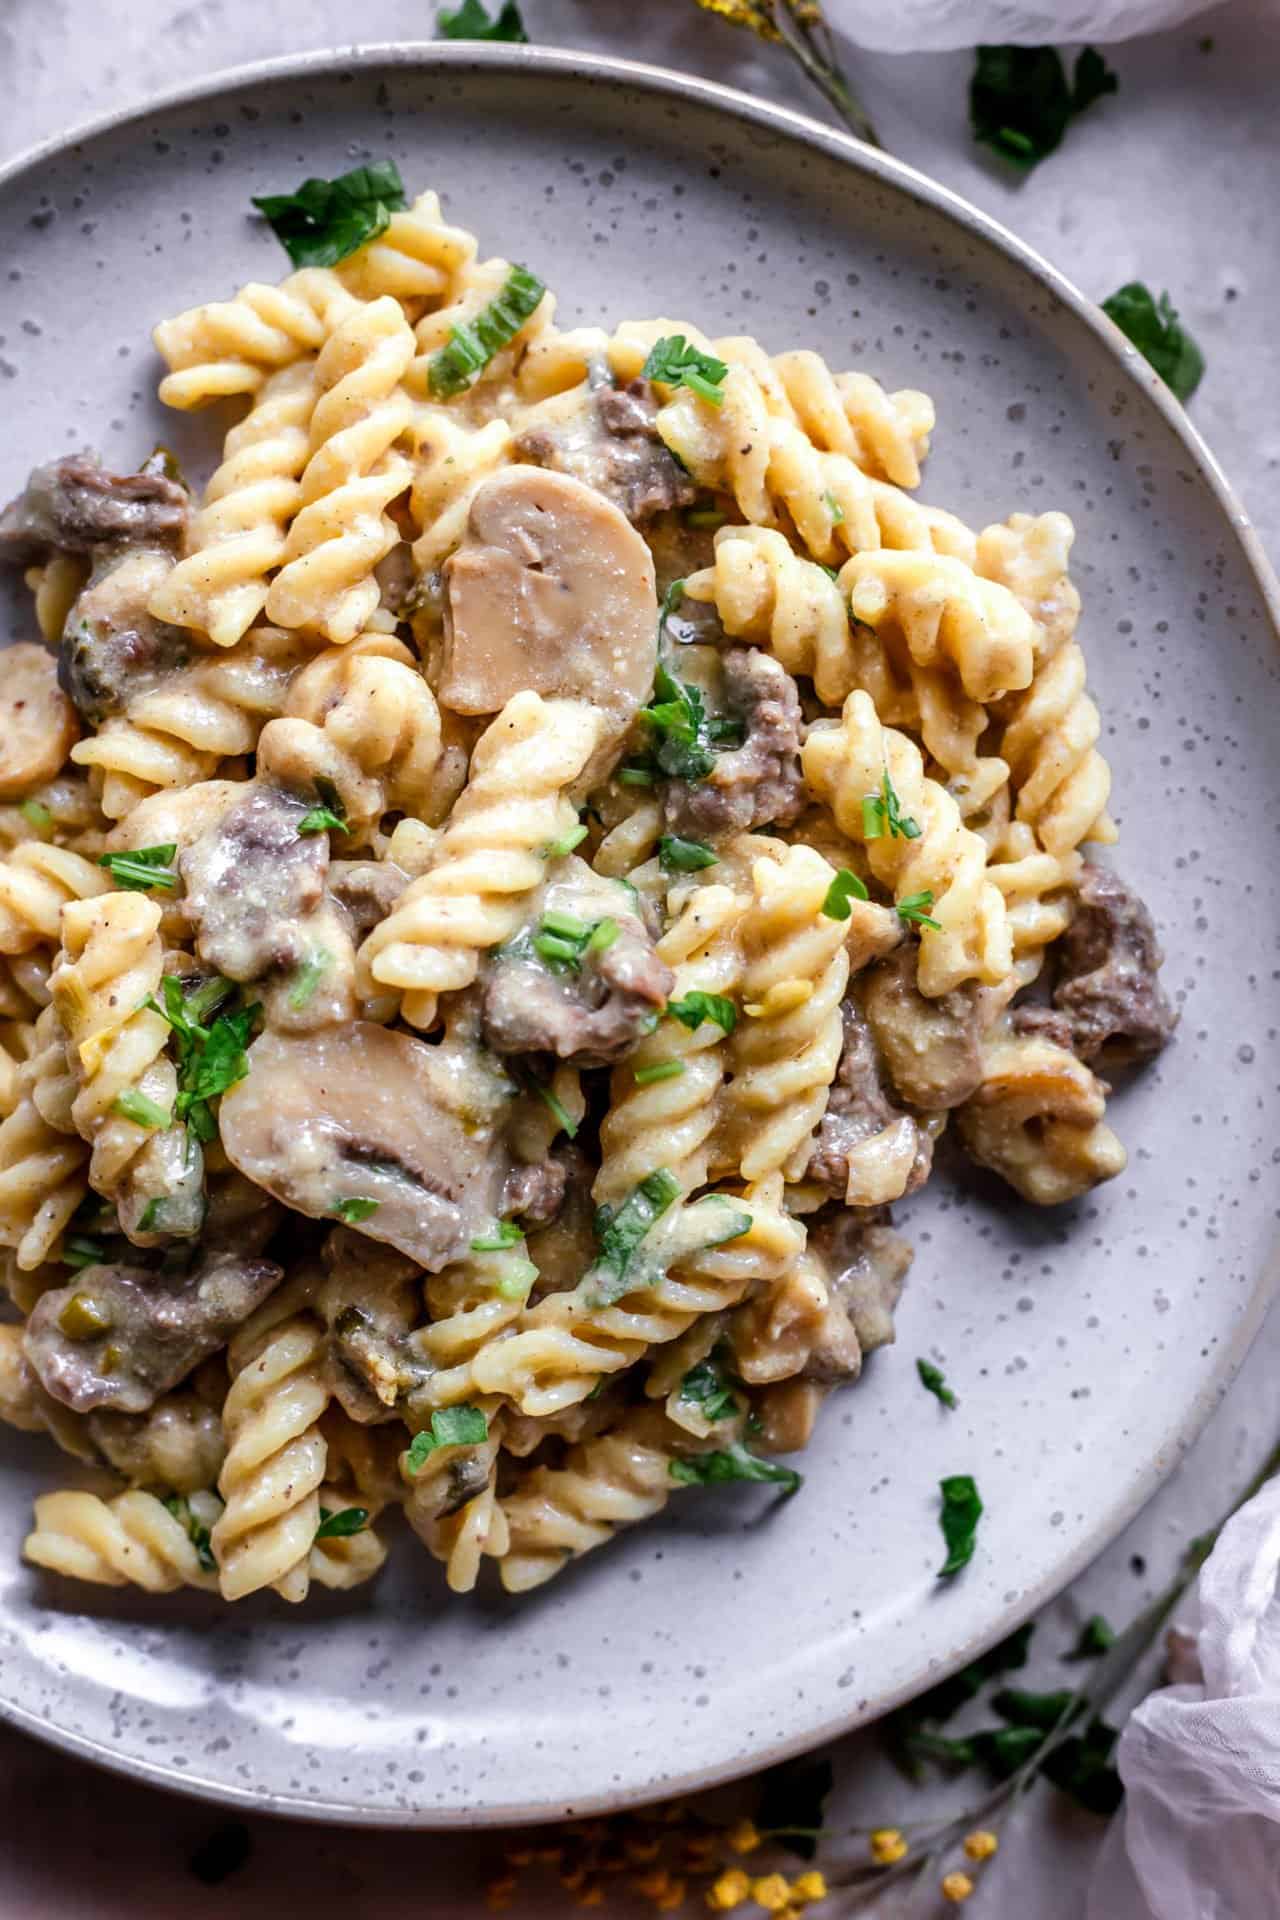 This Low FODMAP Beef Stroganoff is super rich and creamy, comforting, hearty, flavourful, simple to make and so delicious!
